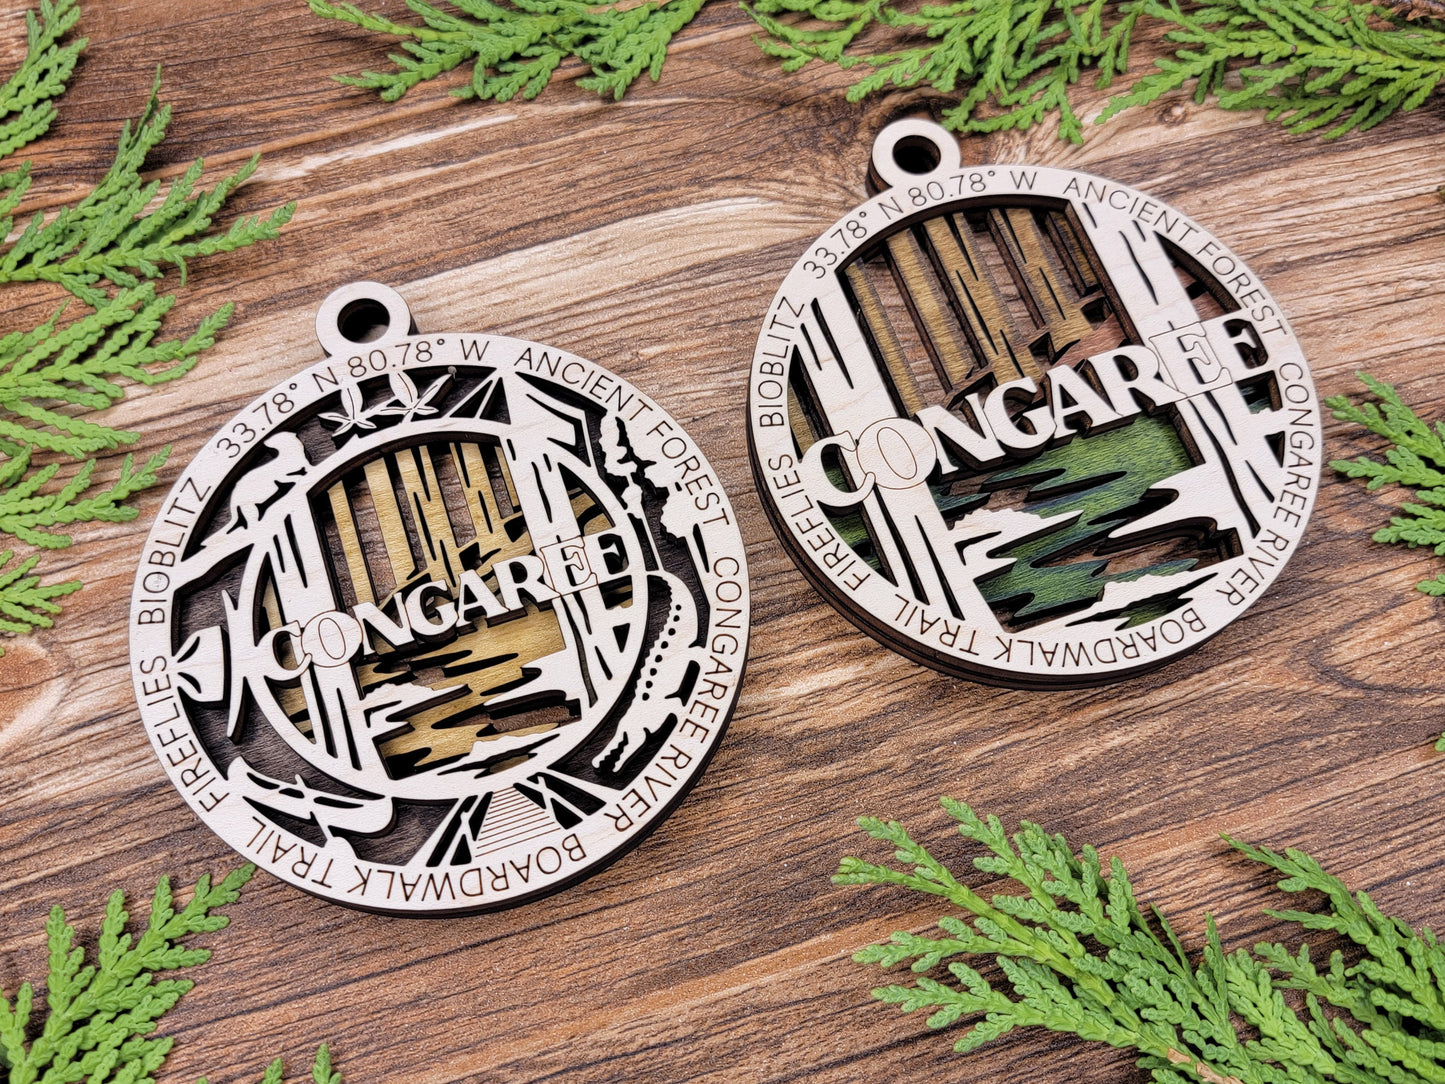 Congaree Park Ornament - Includes 2 Ornaments - Laser Design SVG, PDF, AI File Download - Tested On Glowforge and LightBurn